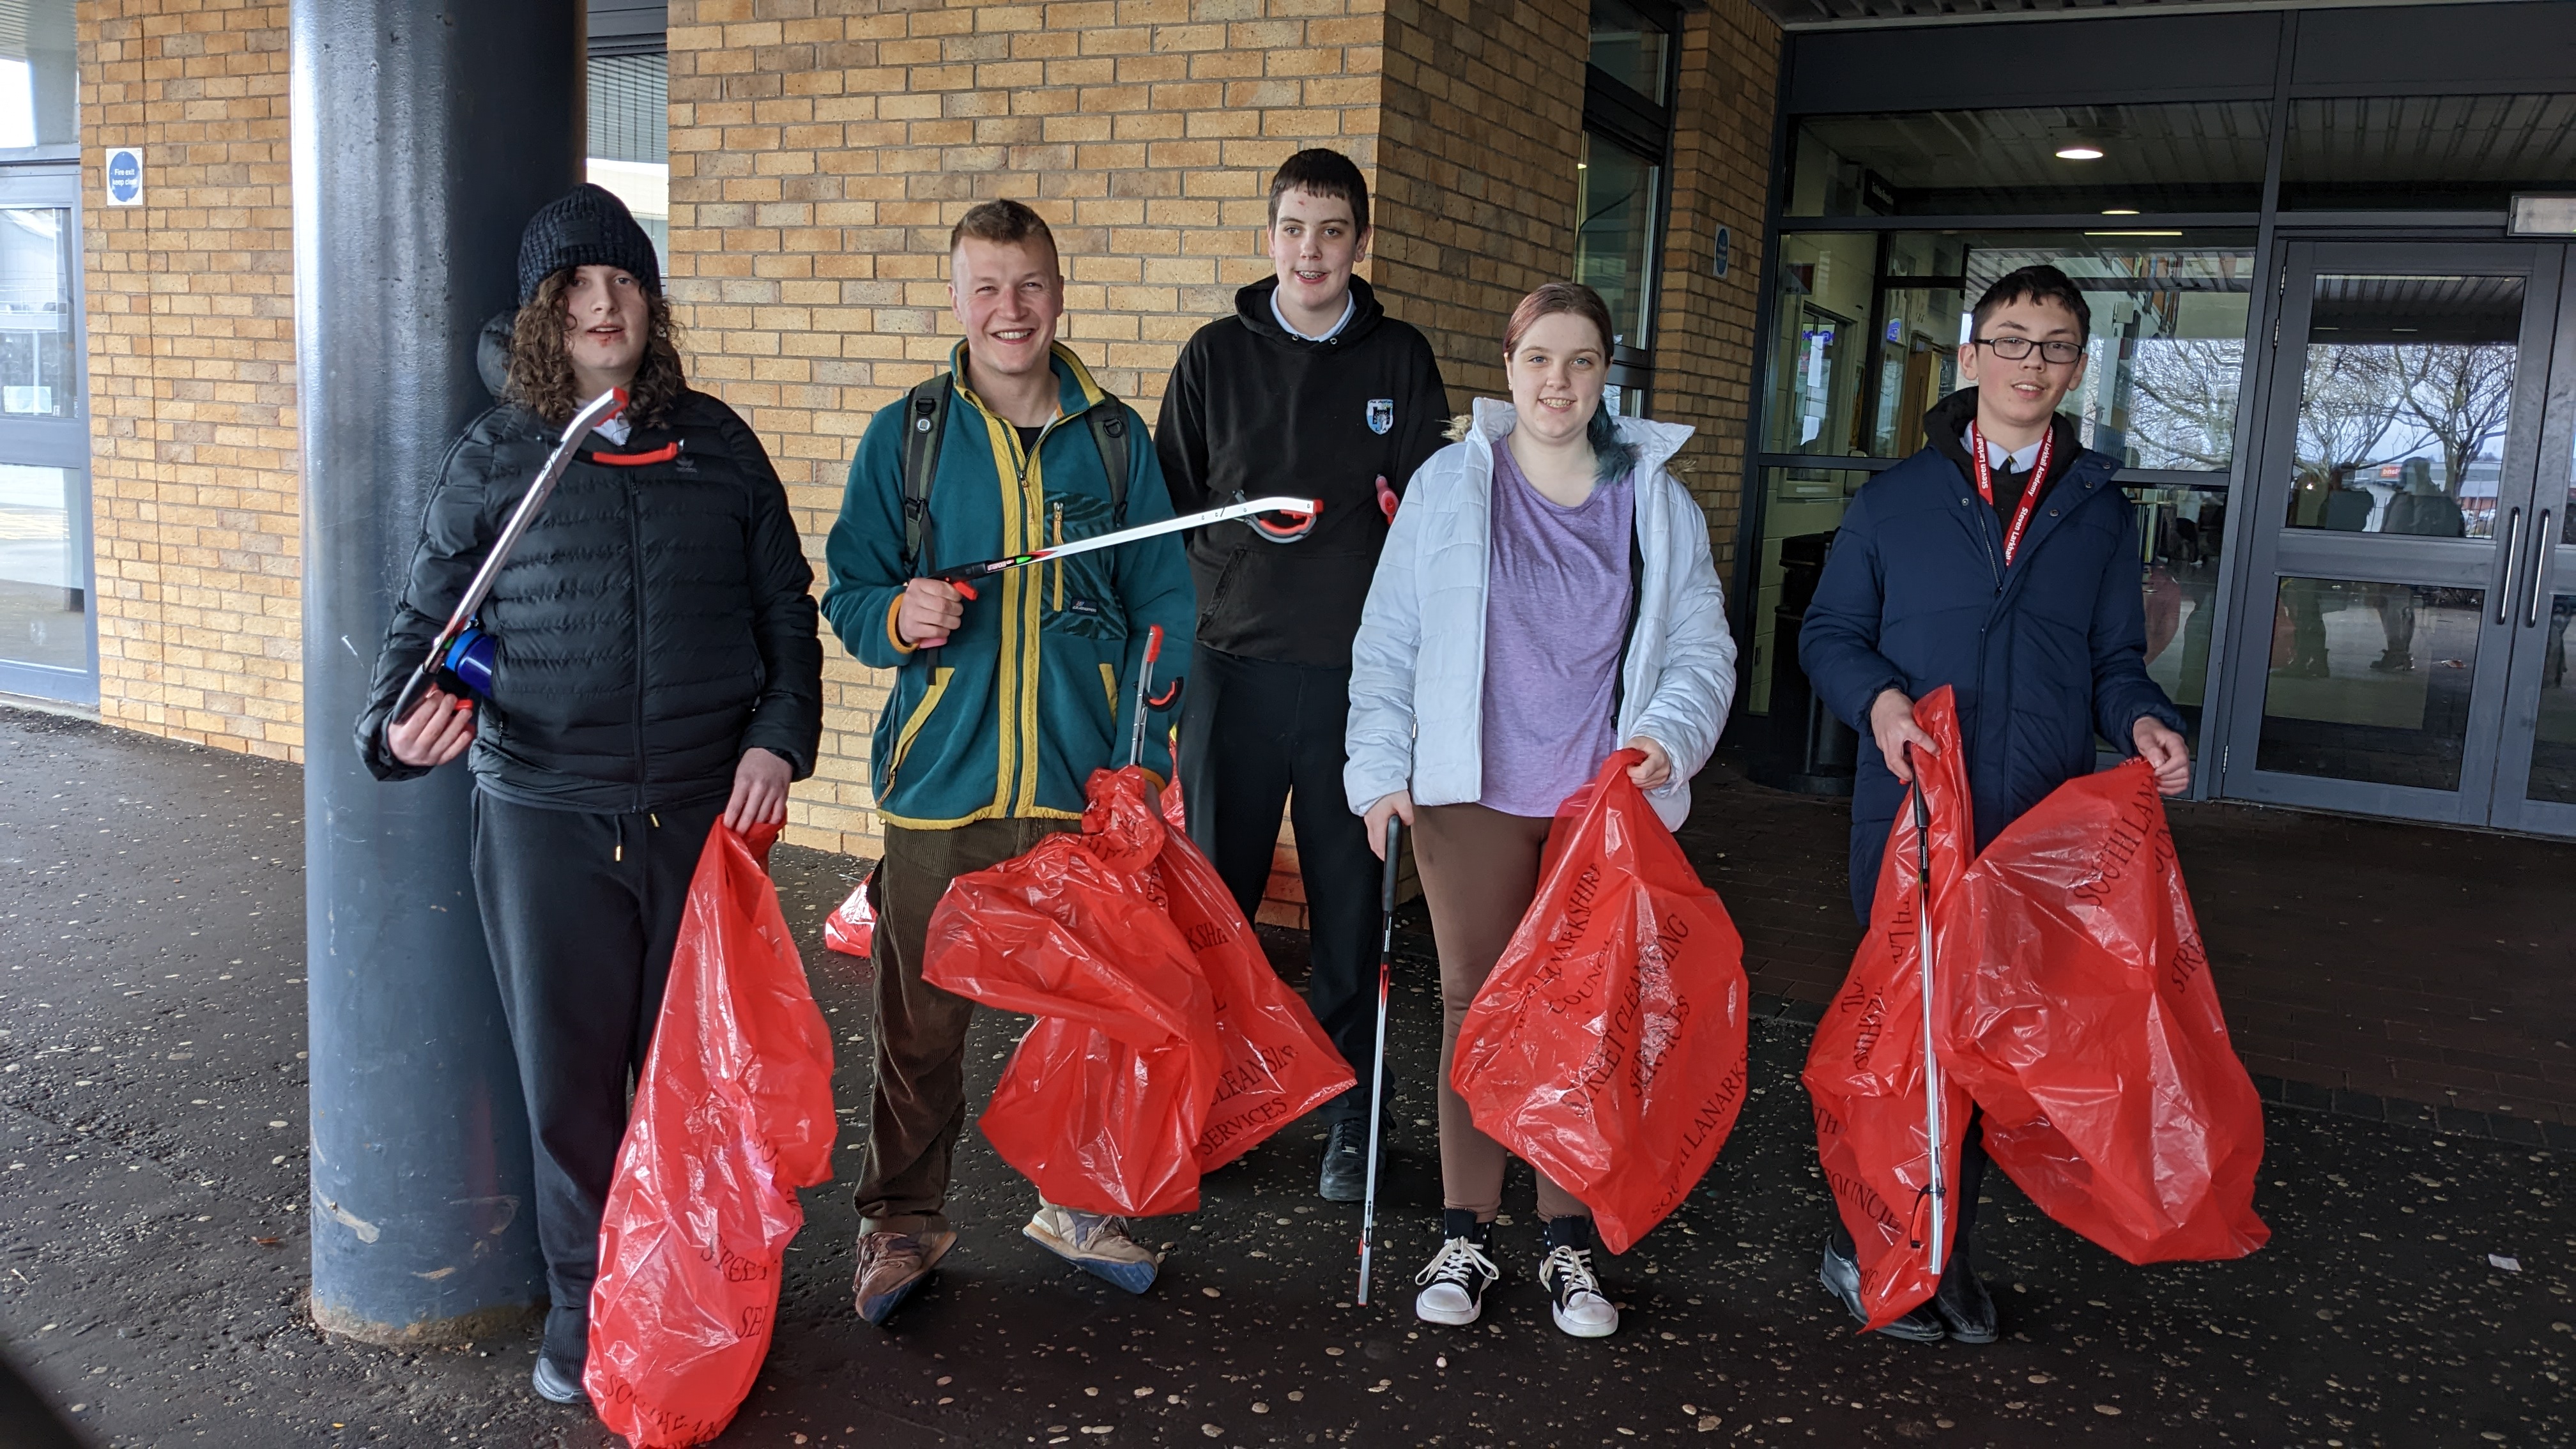 A group of people with litter pickers